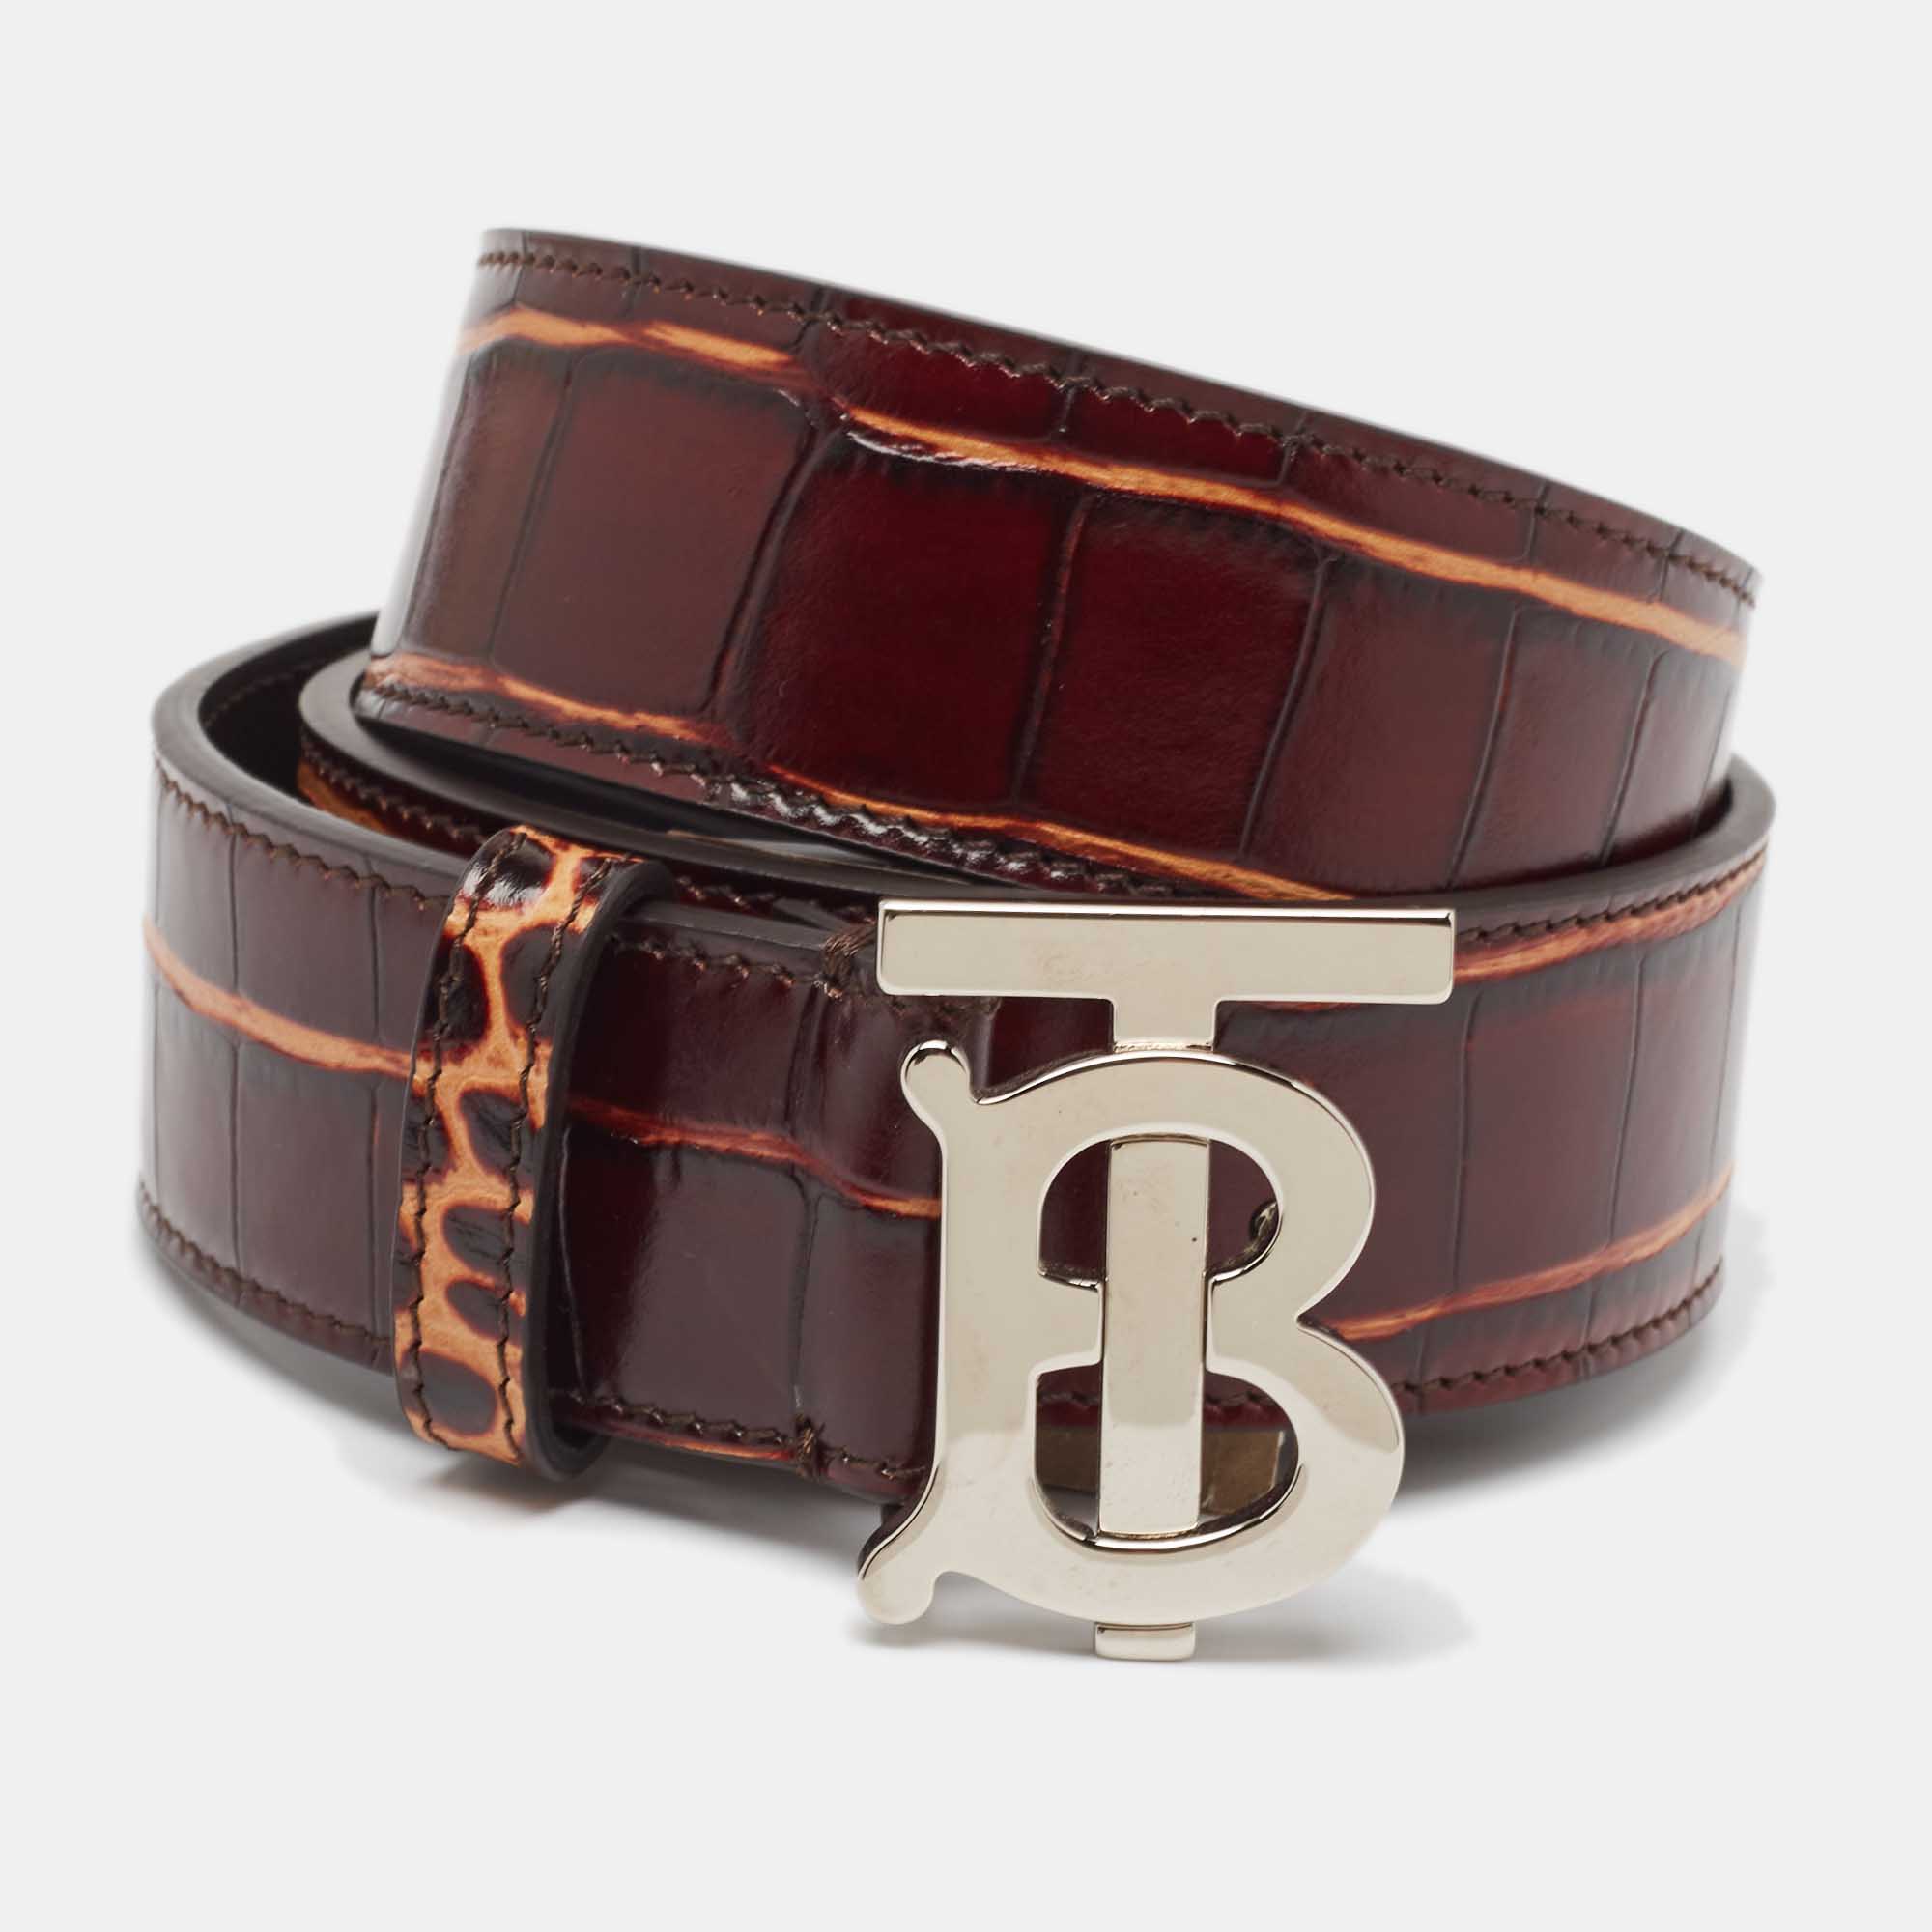 Burberry brown croc embossed leather tb buckle belt 80cm